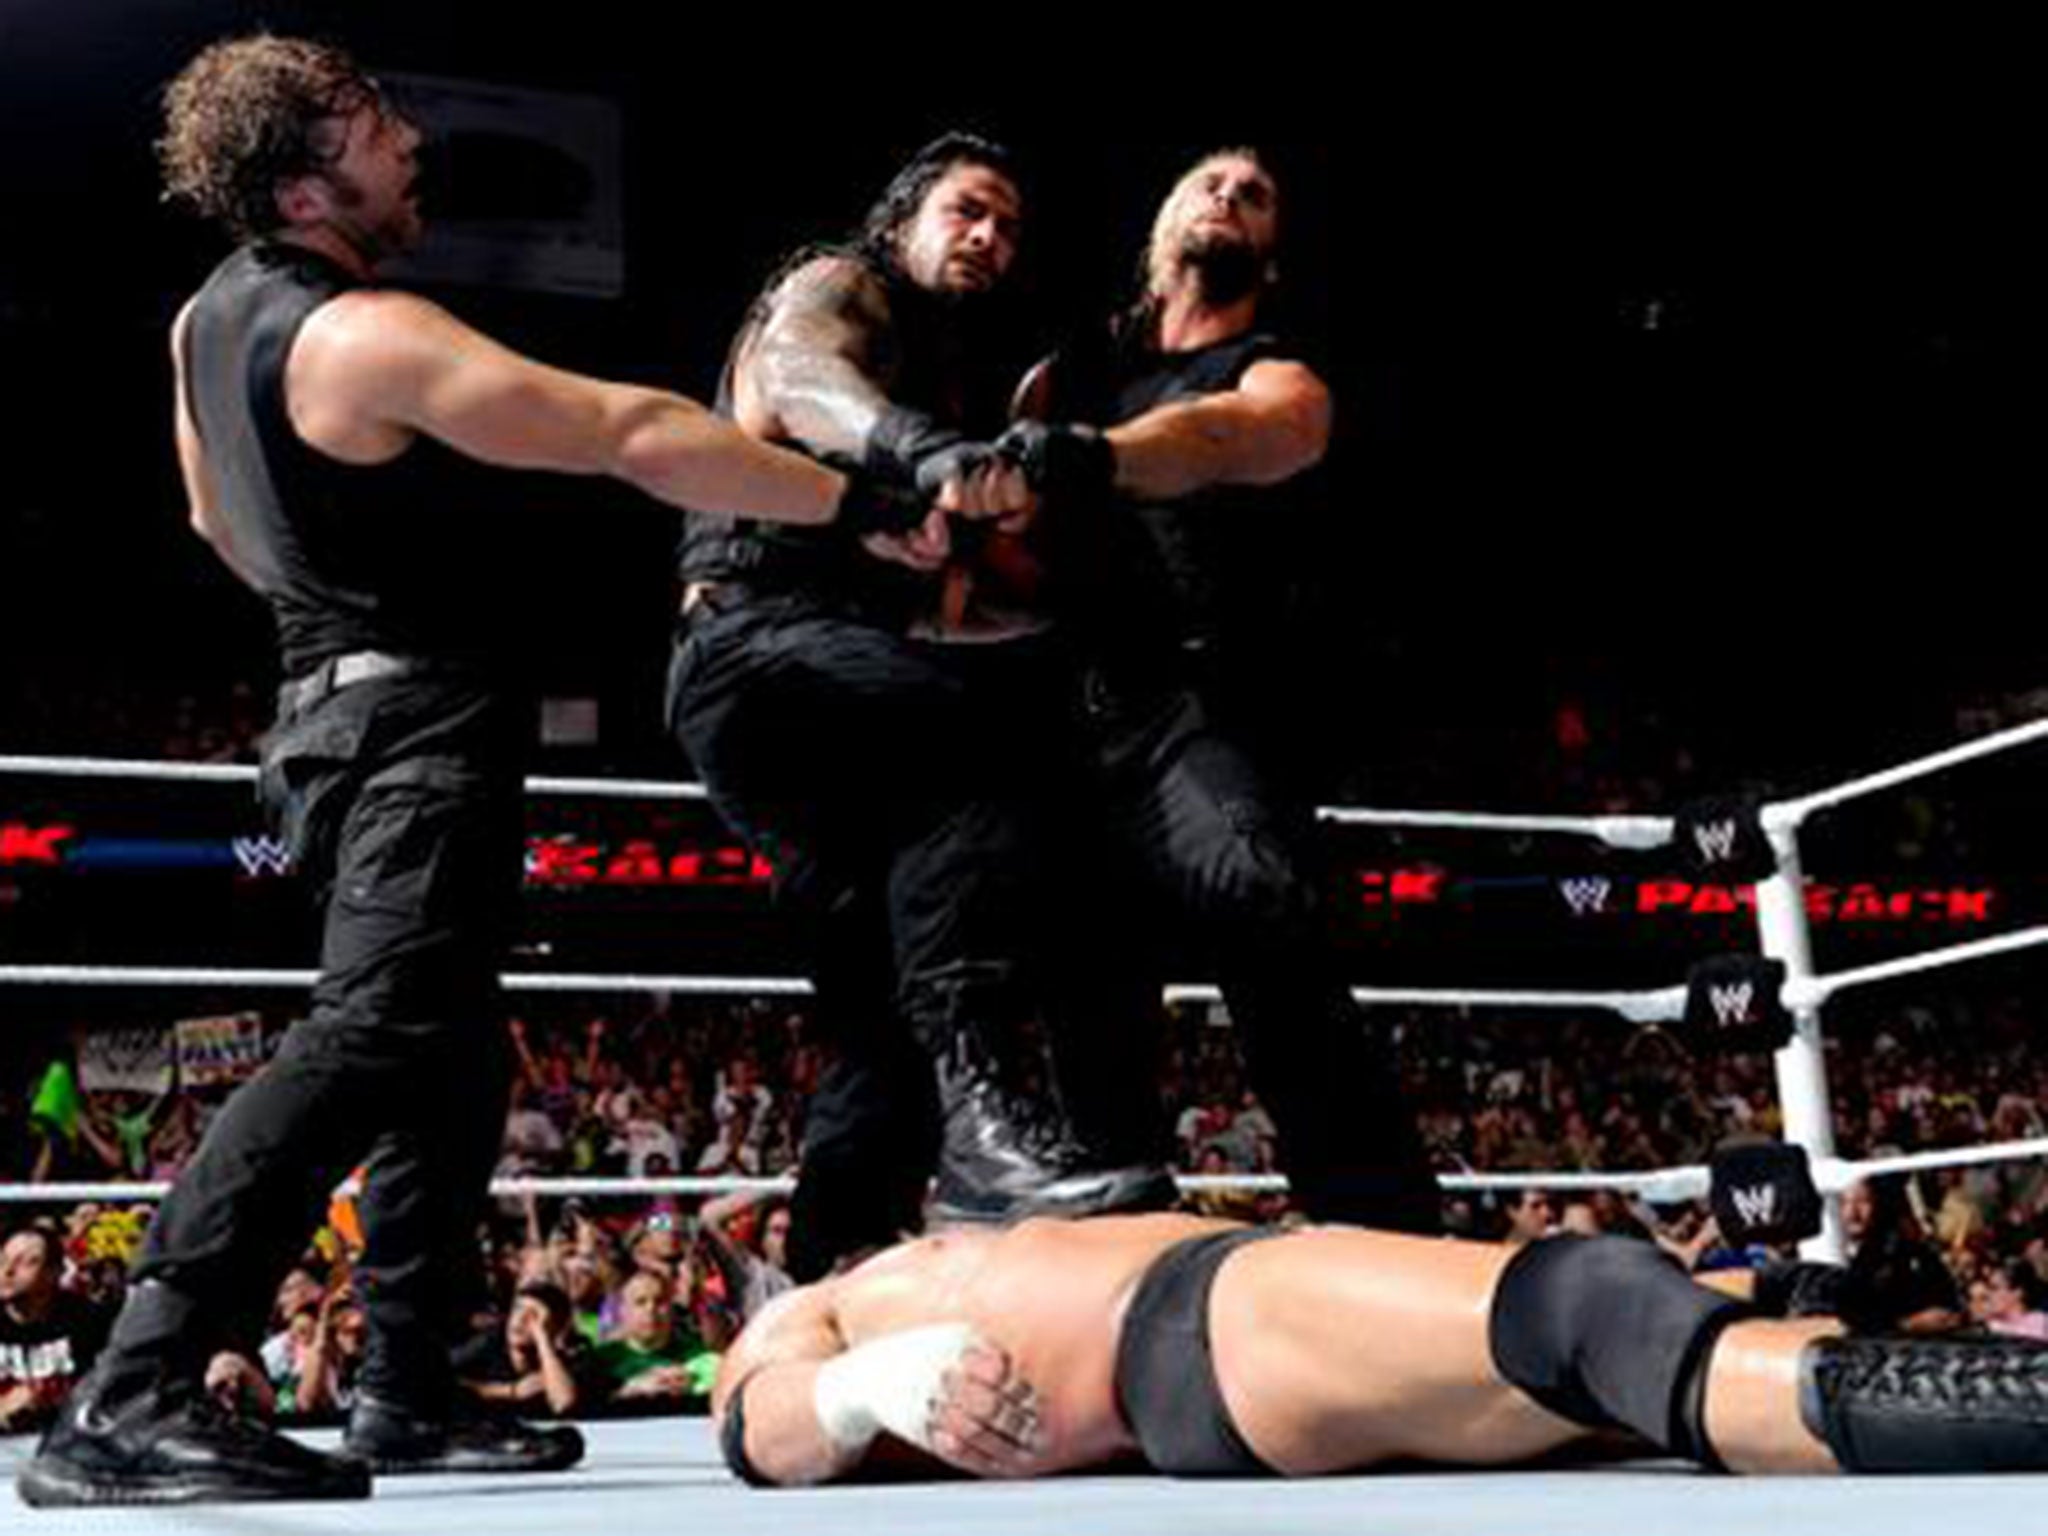 Wwe Payback 2014 Results The Shield Run Riot Over